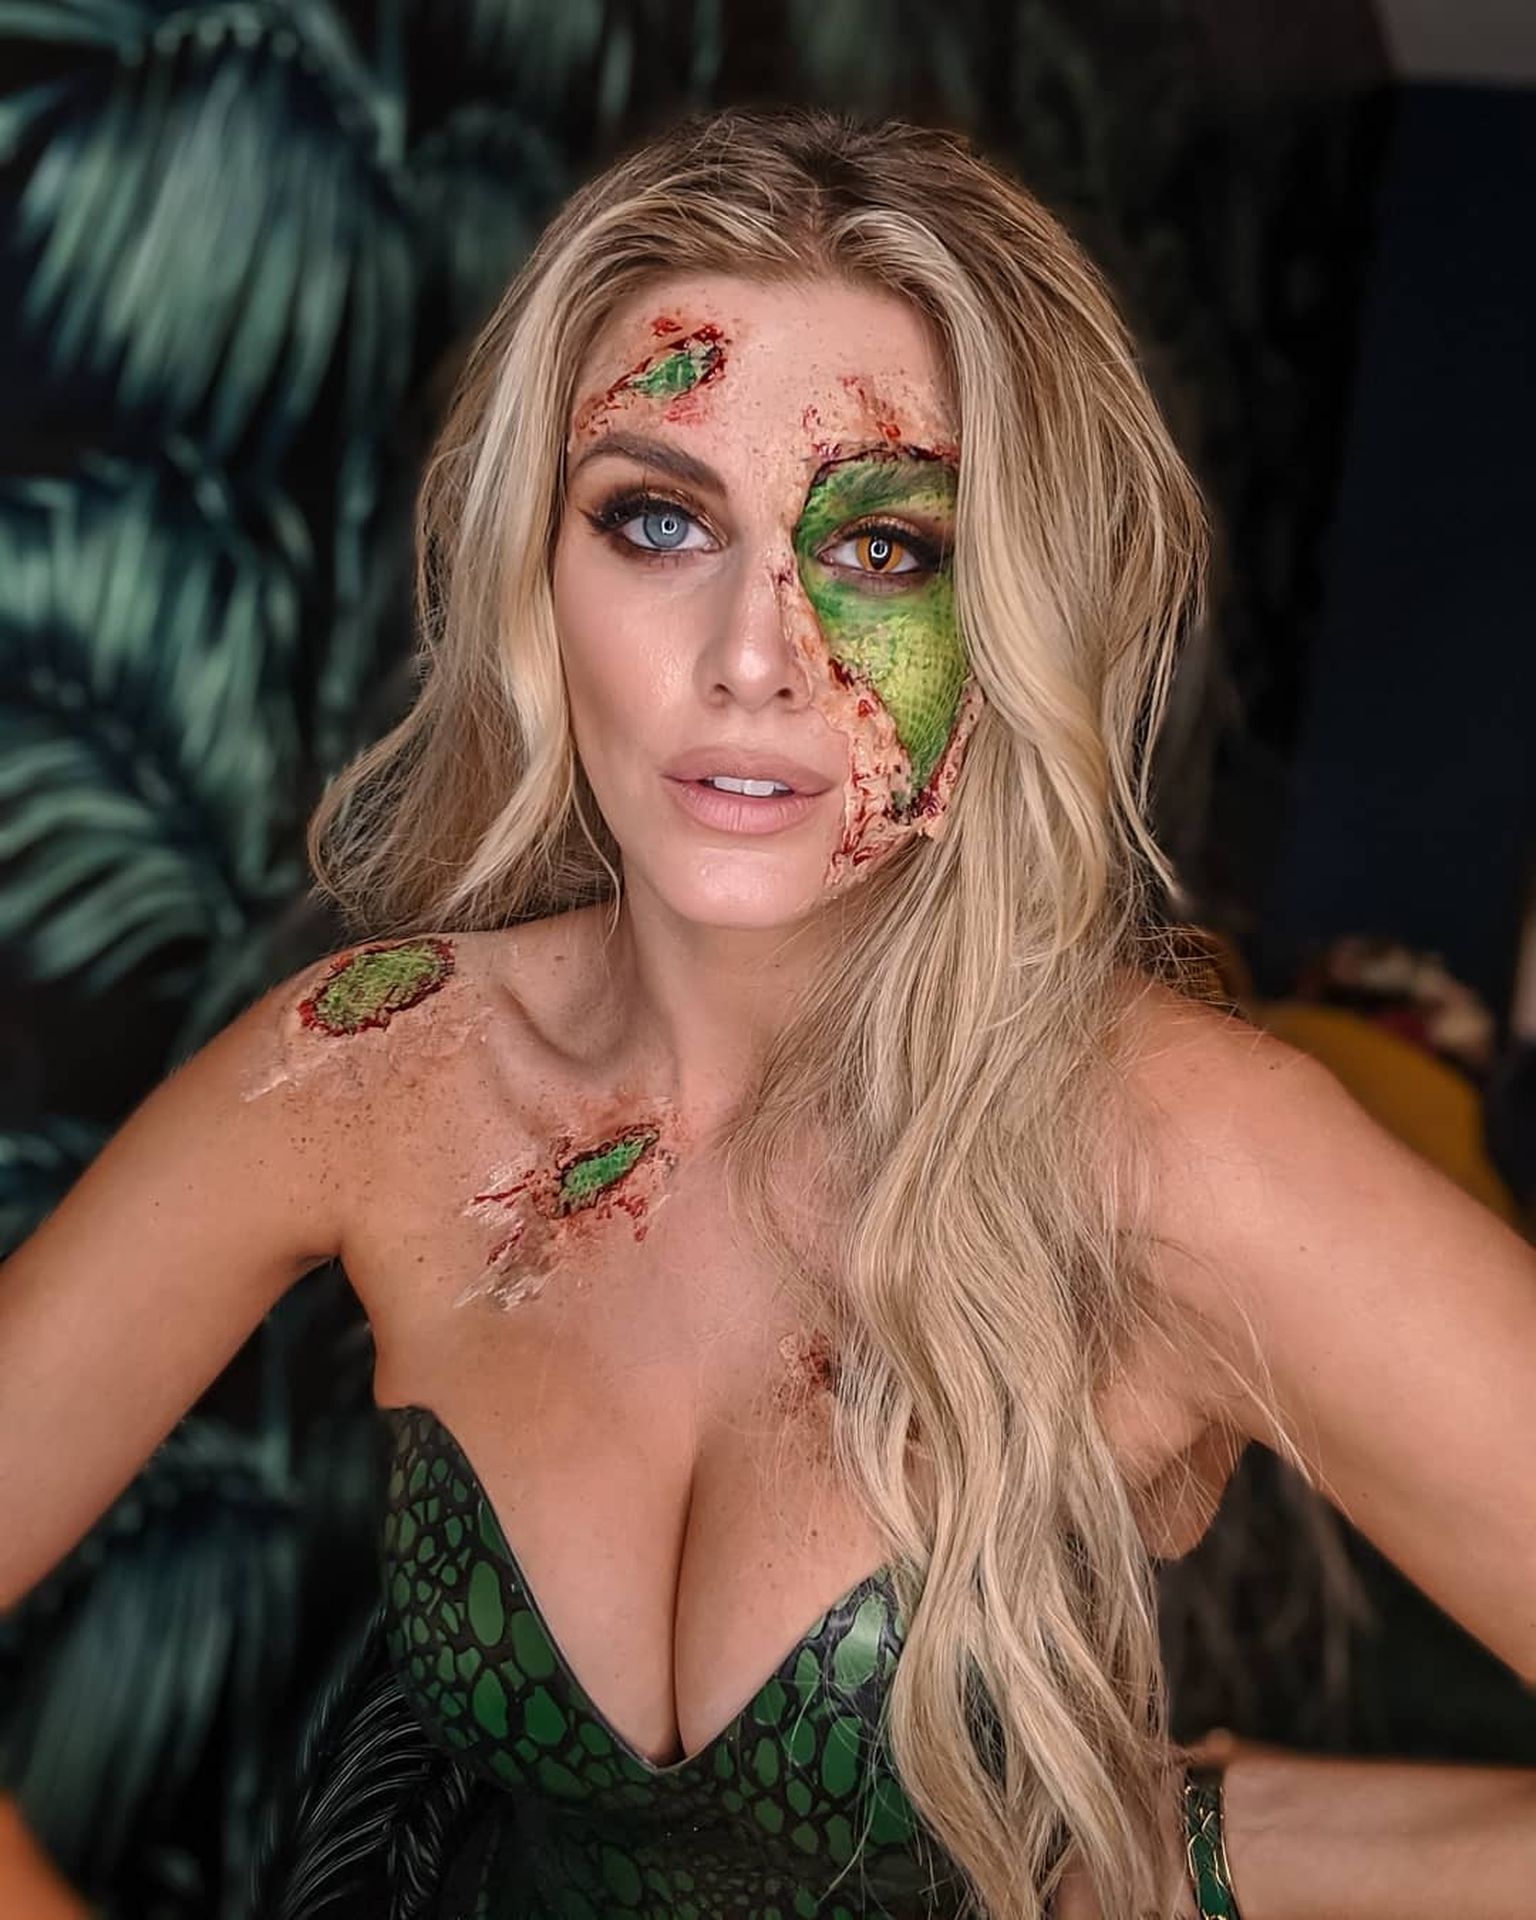 Ashley James at a Halloween Party